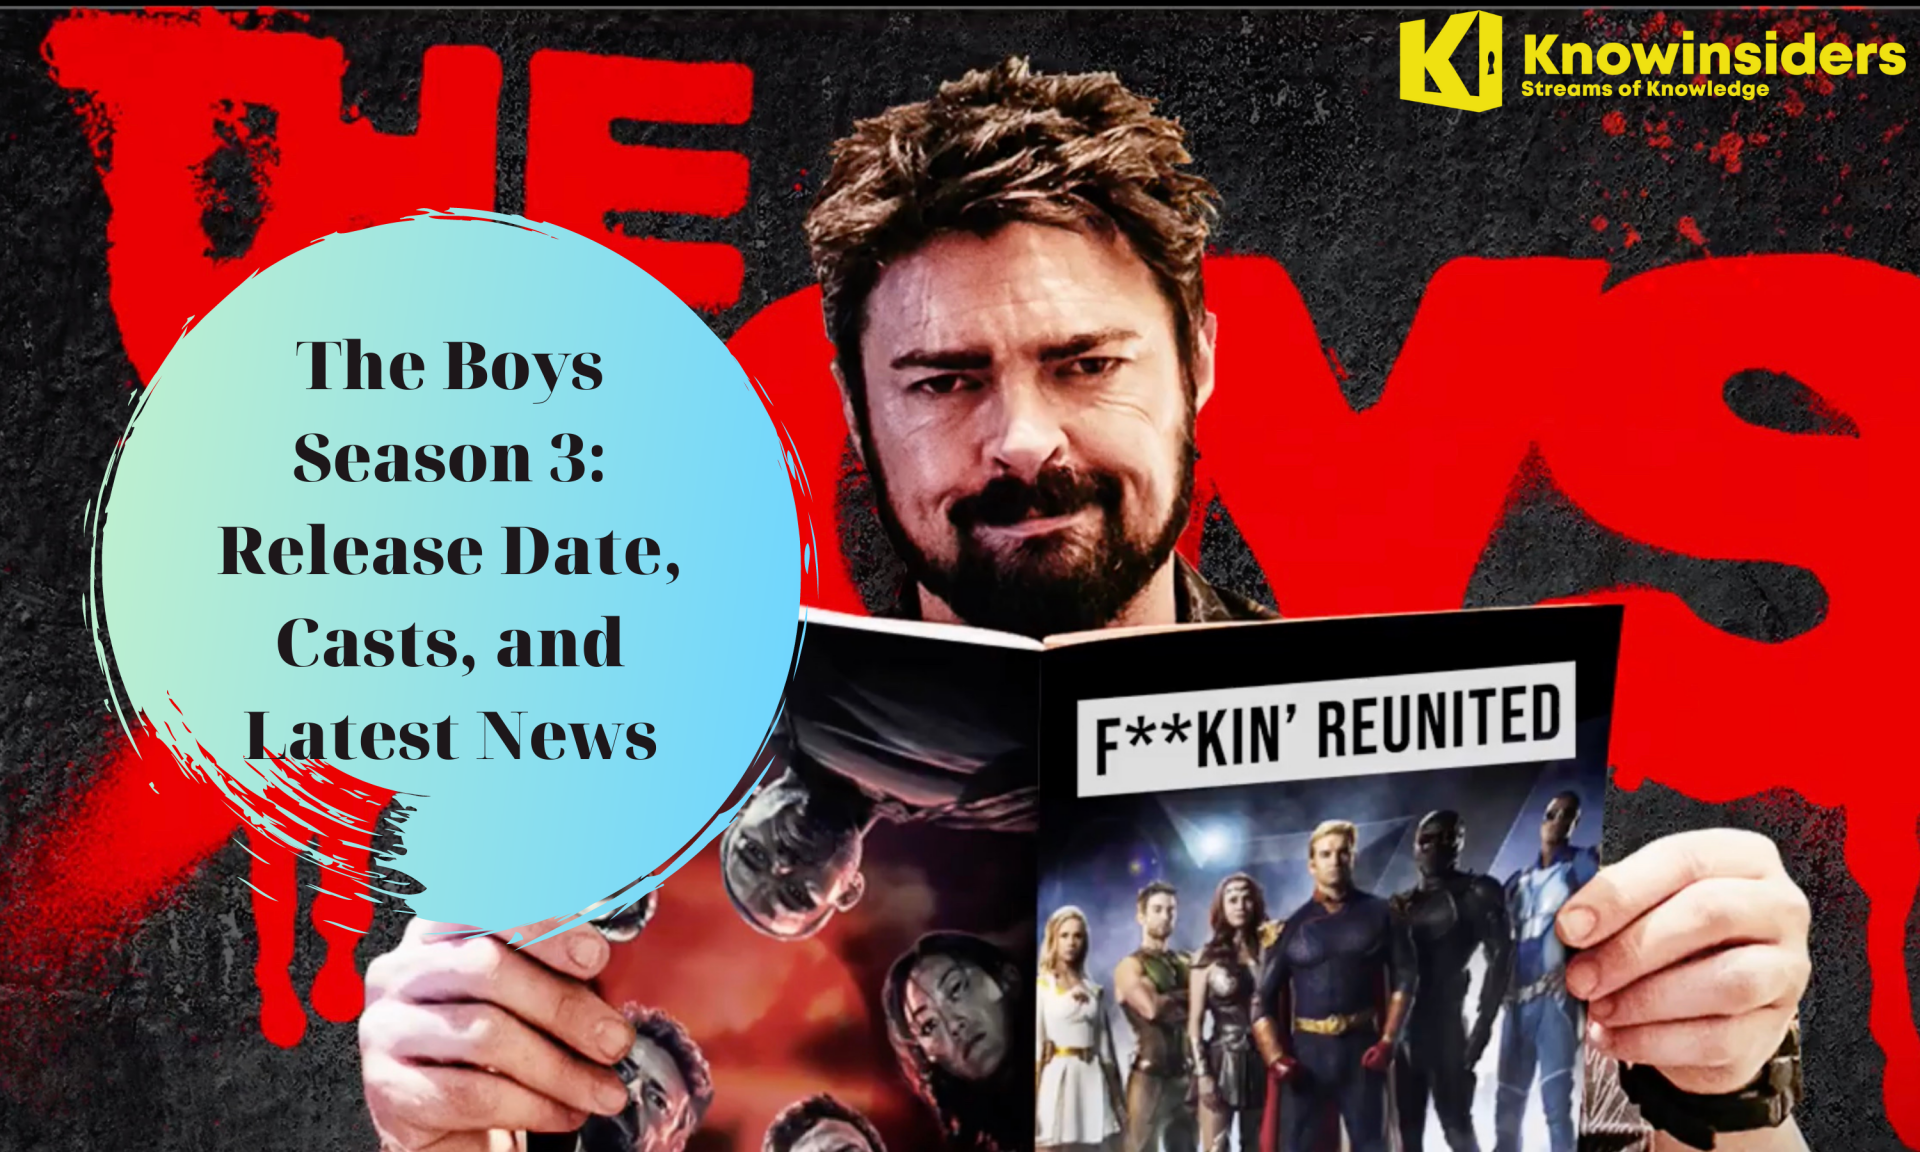 The Boys Season 3: Release Date, Casts, and Latest News